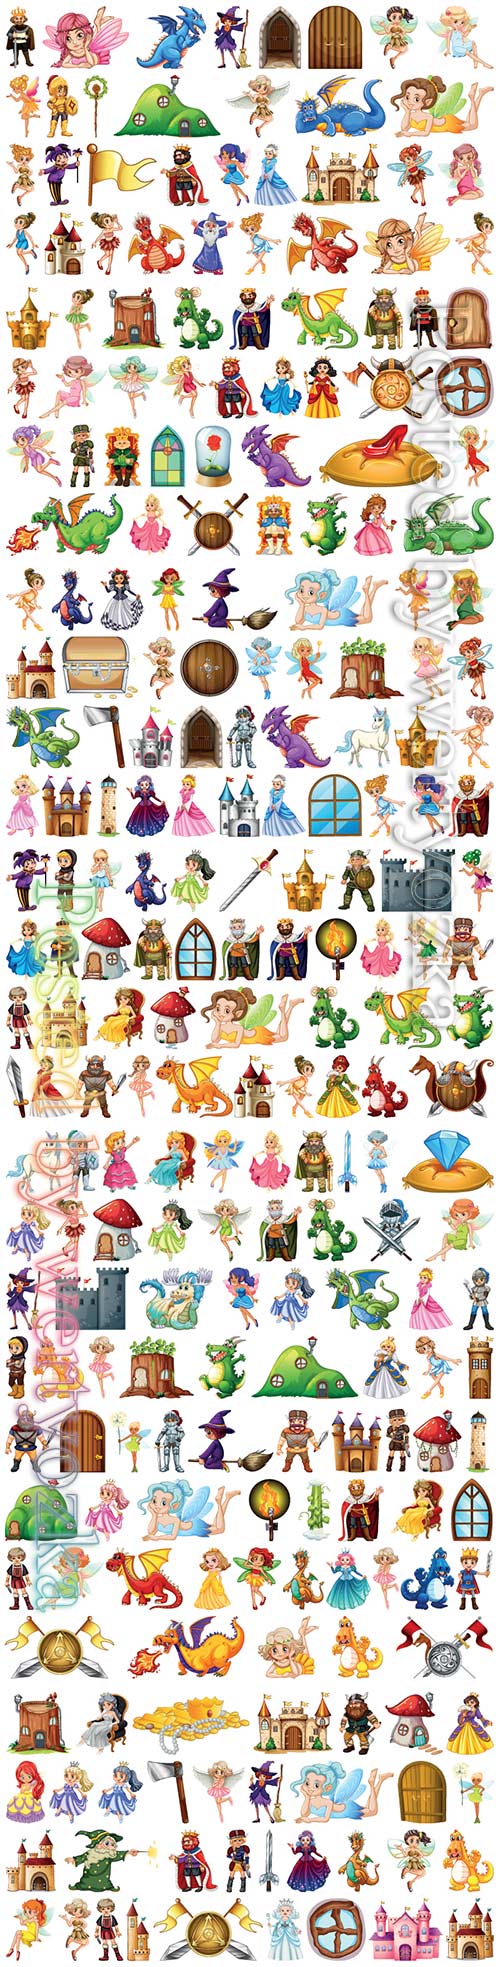 Set of fairy tale vector character